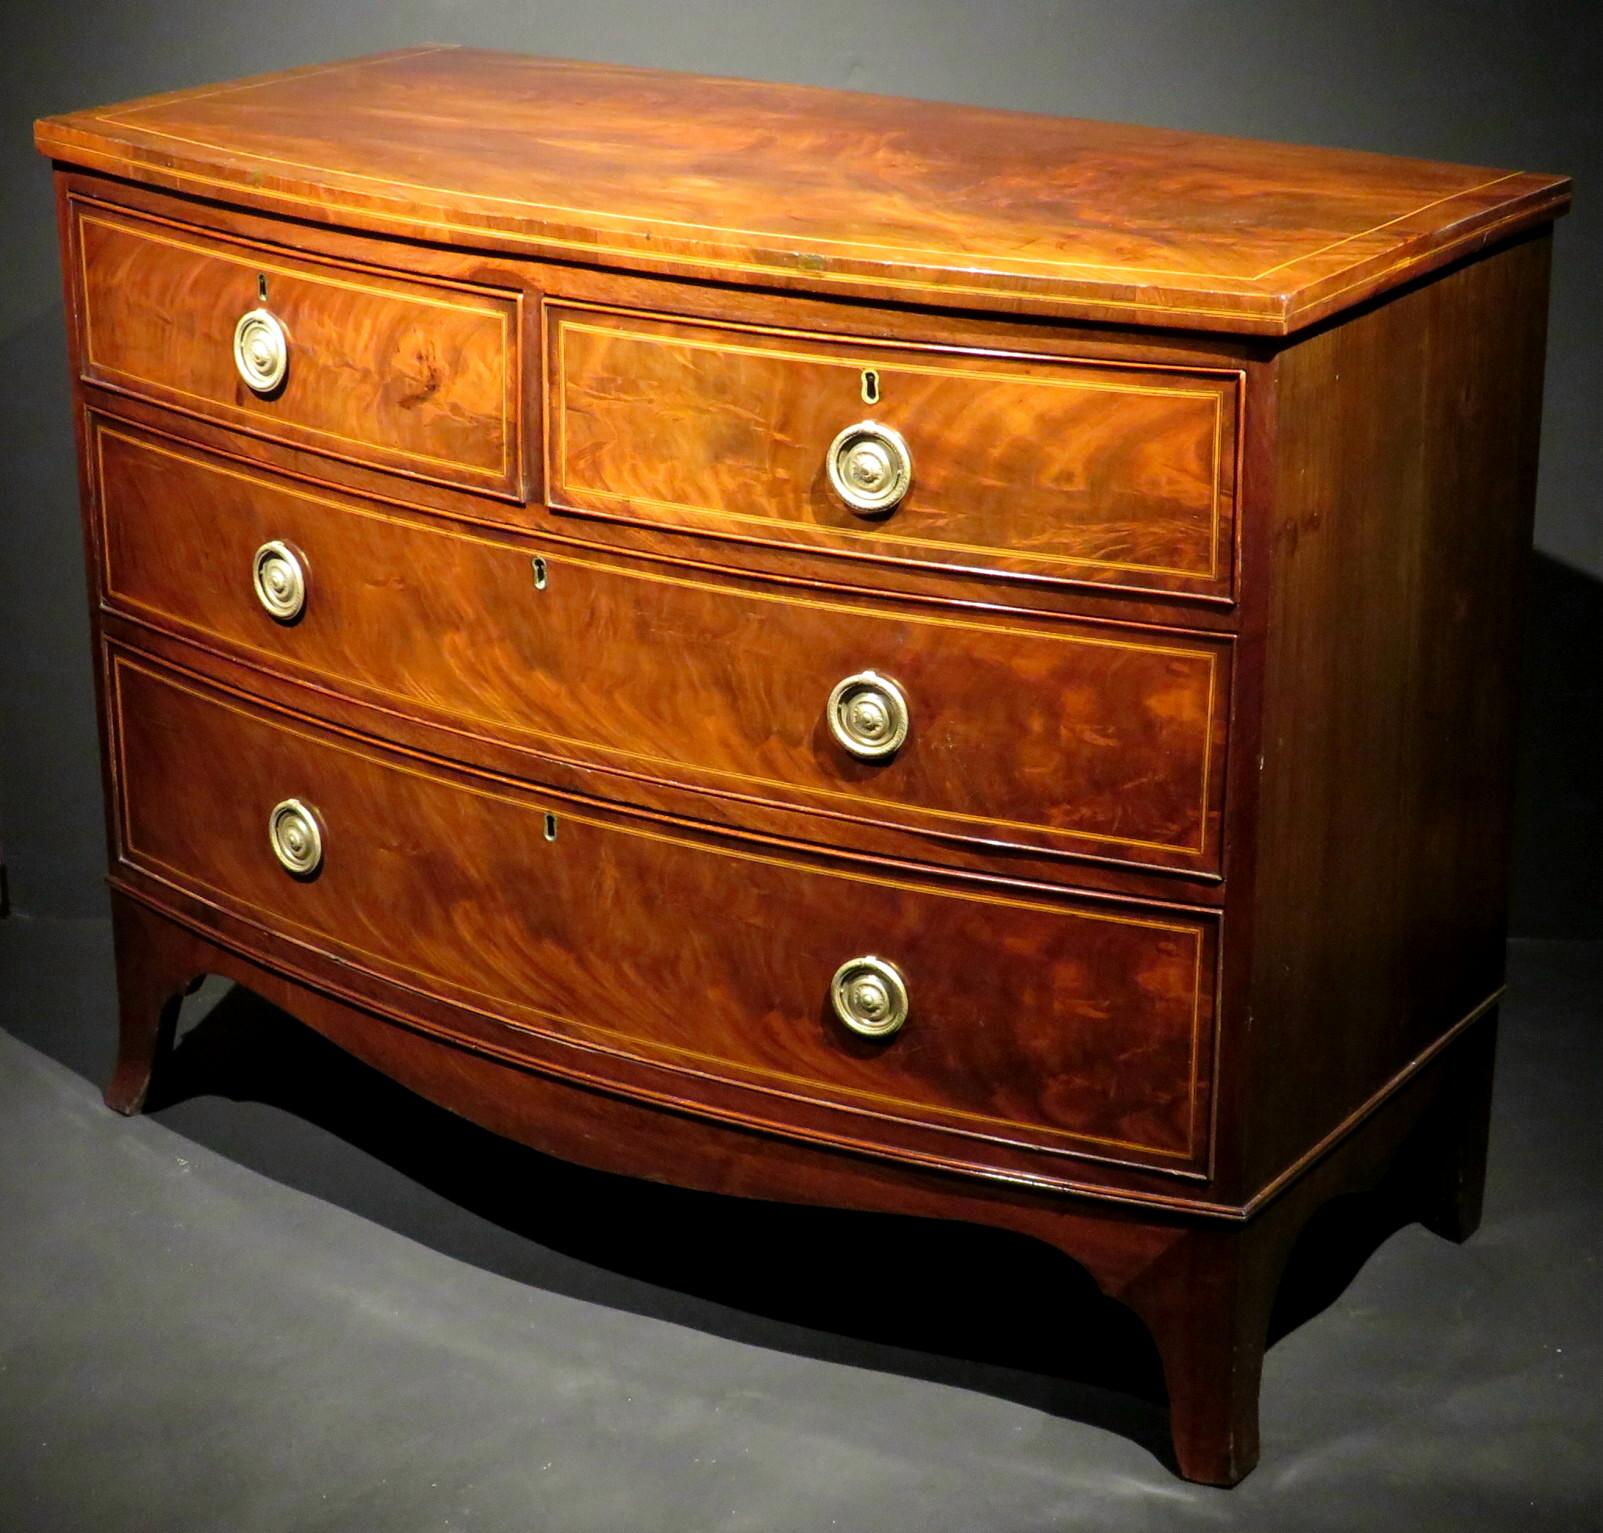 A very handsome bow-fronted Georgian chest of drawers in mahogany, exhibiting exceptional colour and grain,  as well as being of fine and accommodating proportions. The richly figured case showing a satinwood strung top over 2 short drawers, above